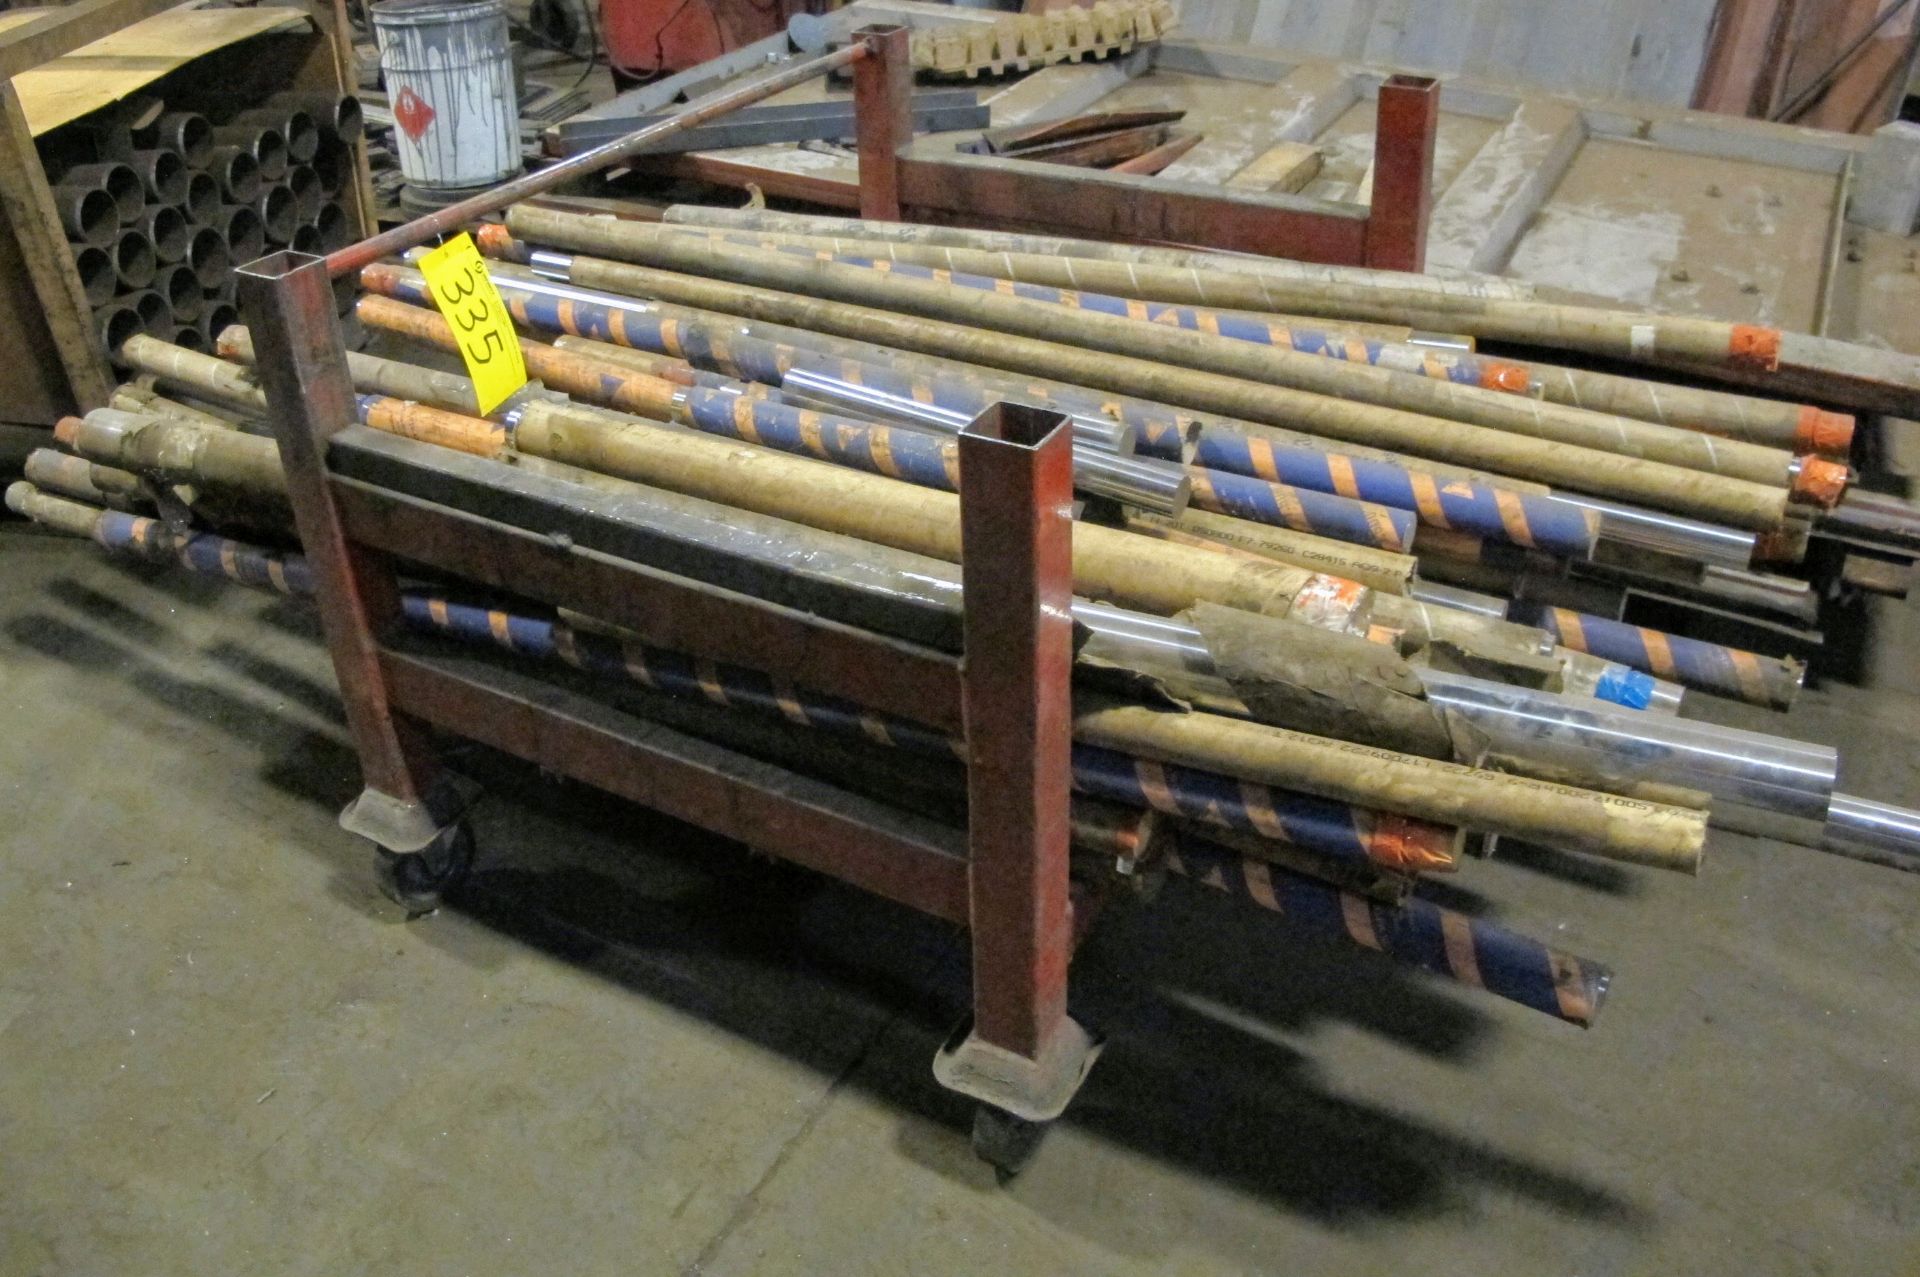 LOT OF STEEL CYLINDER STOCK ON ROLLING CART